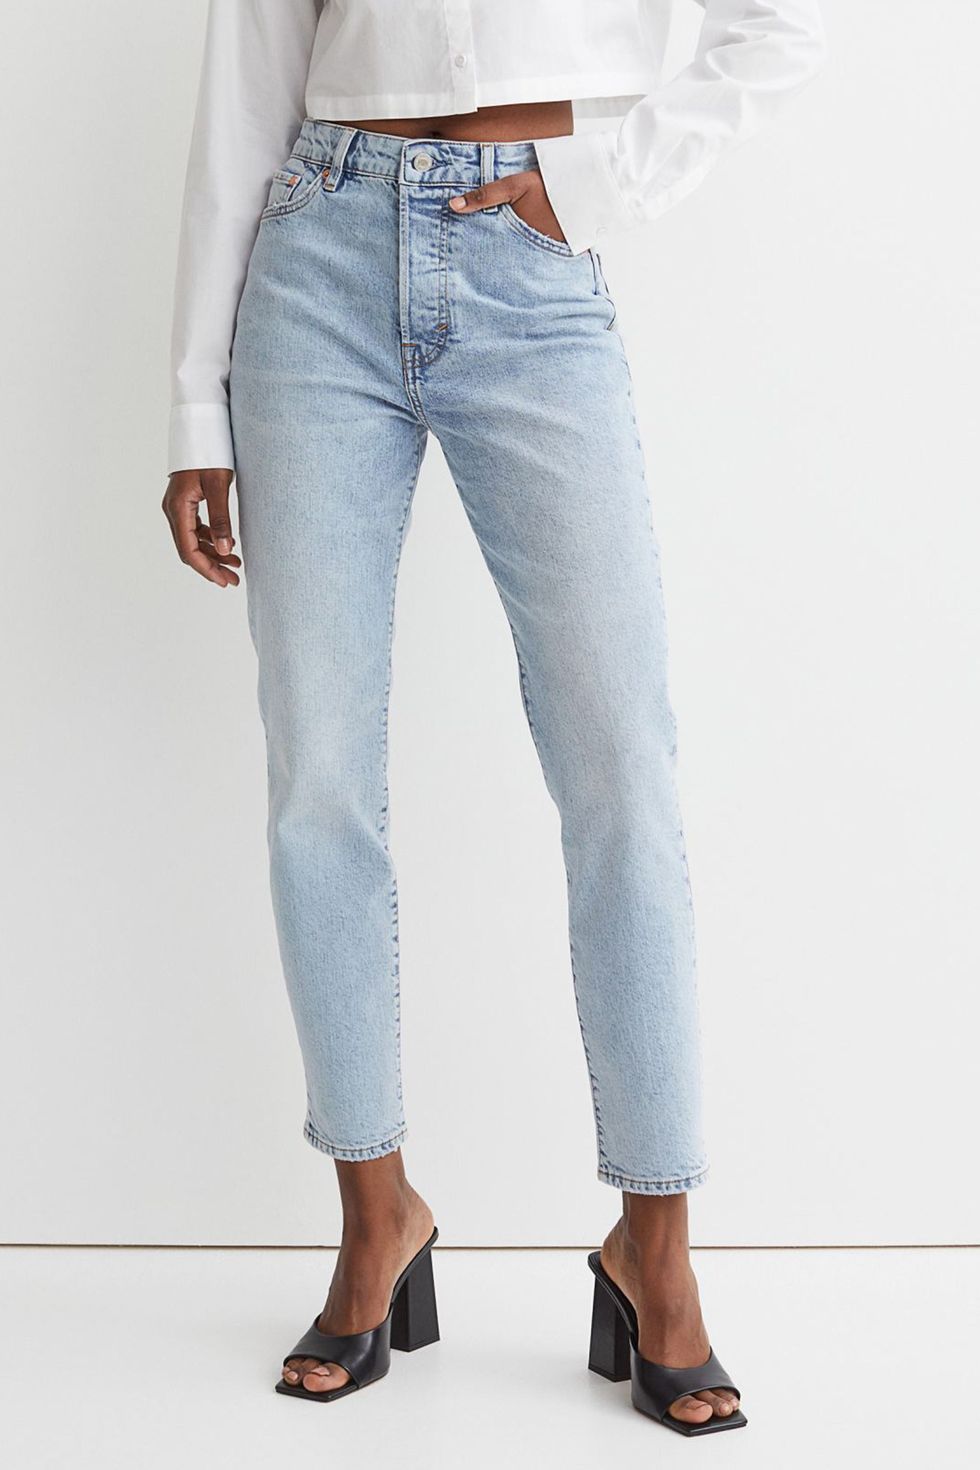 markedsføring bang journalist The 18 Best Mom Jeans - 18 FUPA-Defying Pairs of Mom Jeans